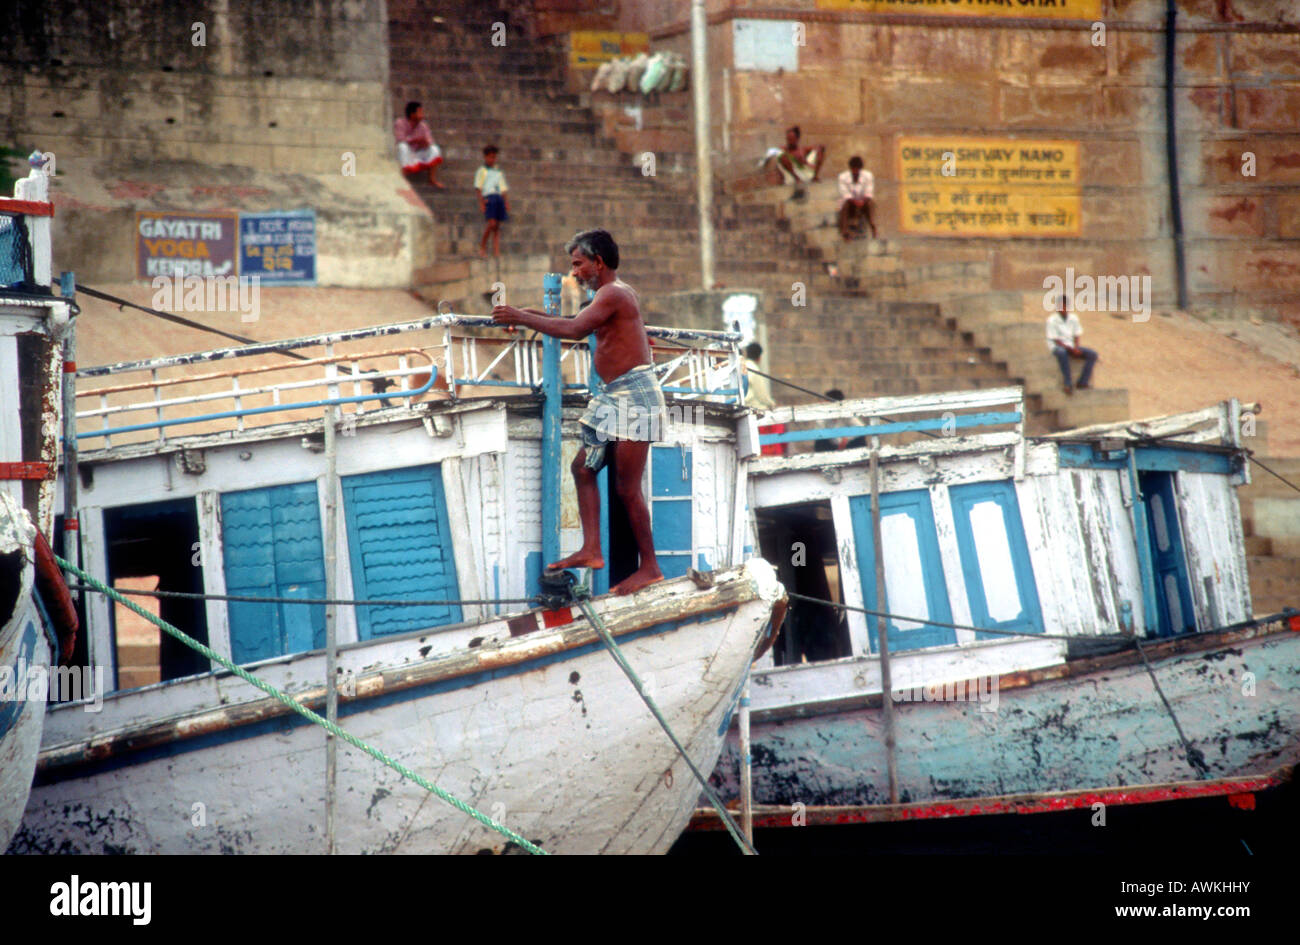 Local people and boats on the banks of the river Ganges at Varanasi, India Stock Photo